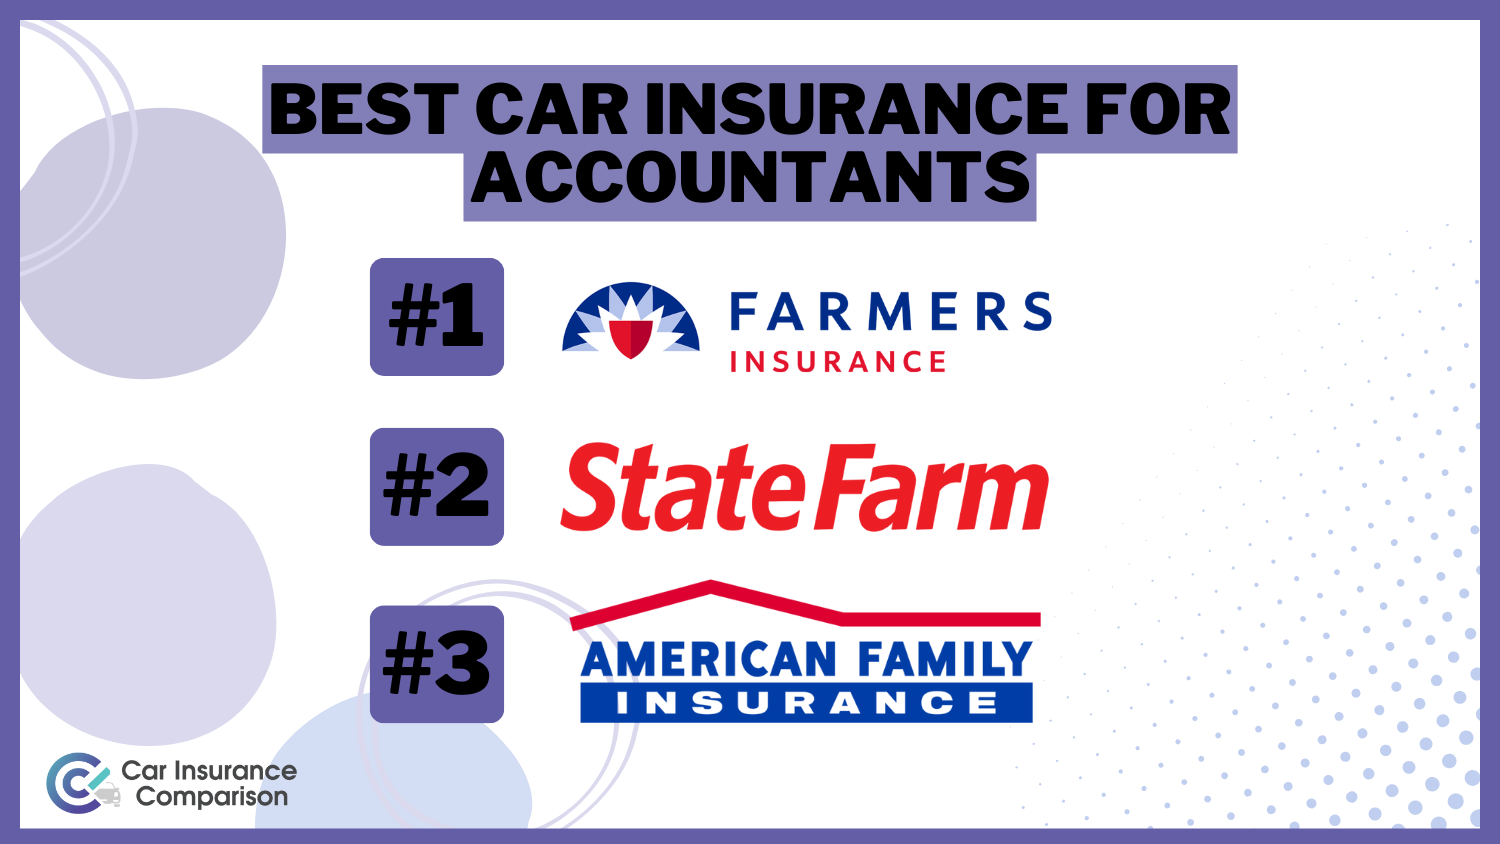 Farmers, State Farm, and American Family: Best Car Insurance for Accountants